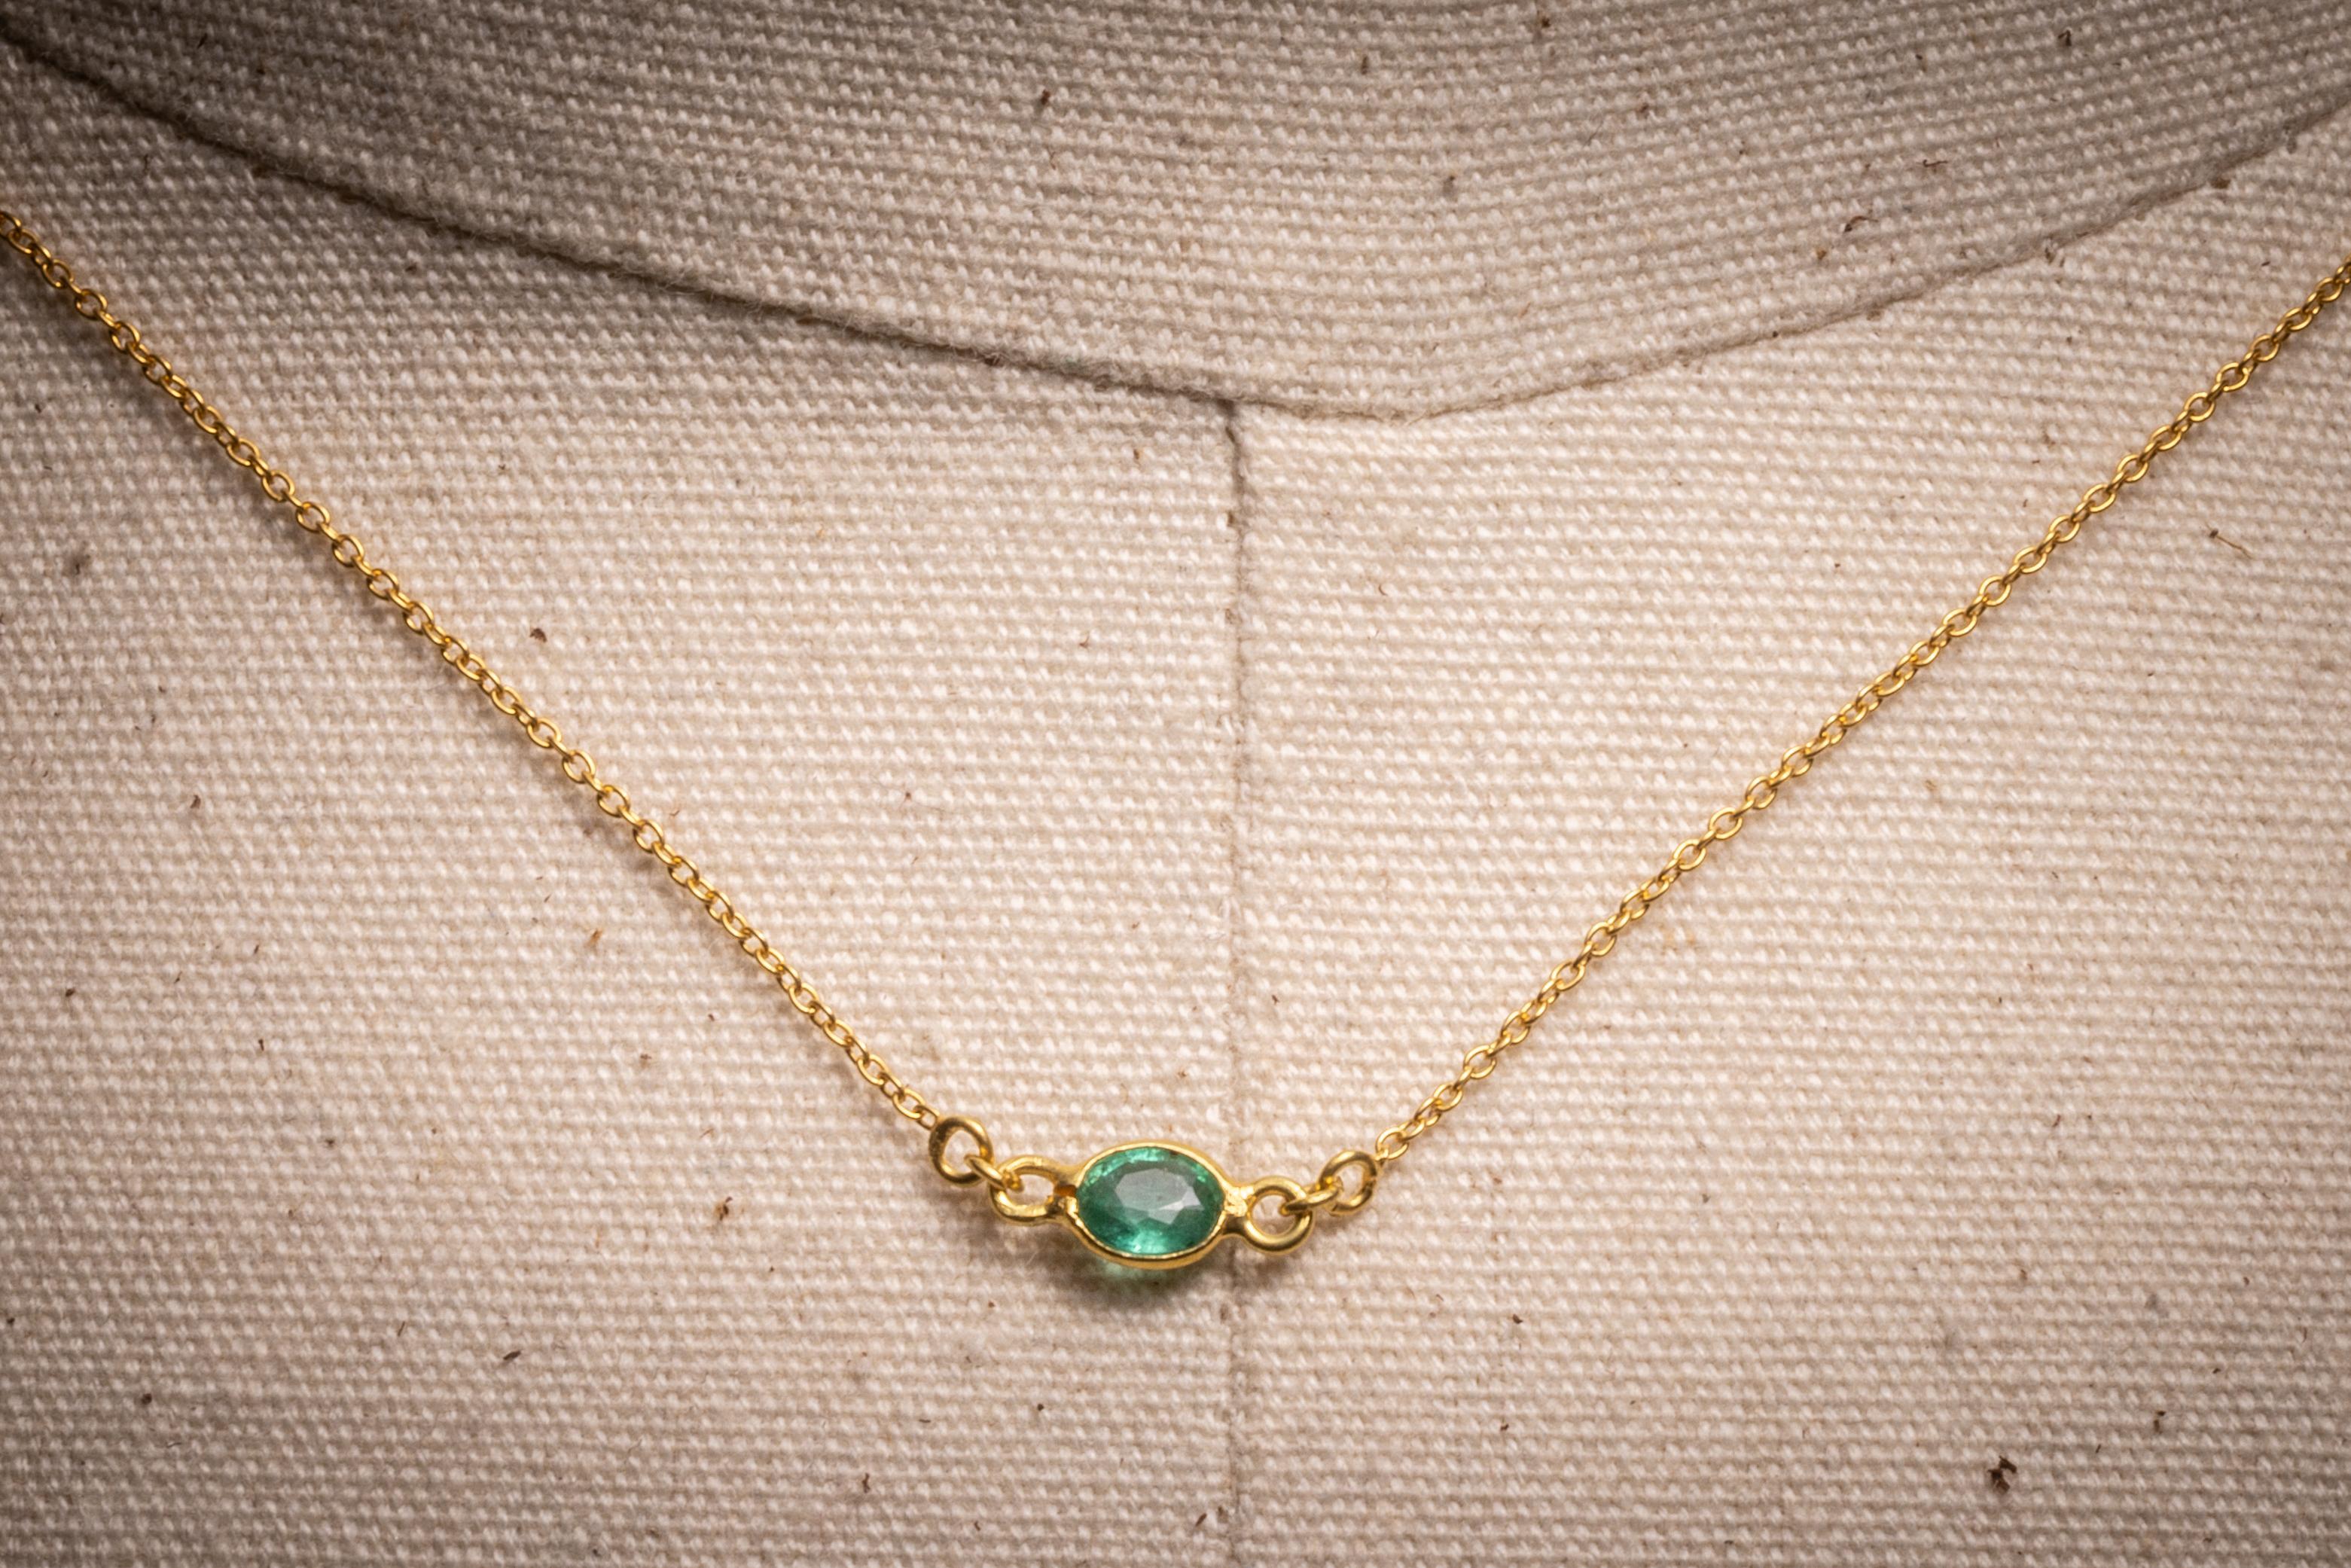 A lovely delicate chain necklace with three oval, faceted Colombian emeralds placed at the center and two at the collar bone.  S-hook clasp.